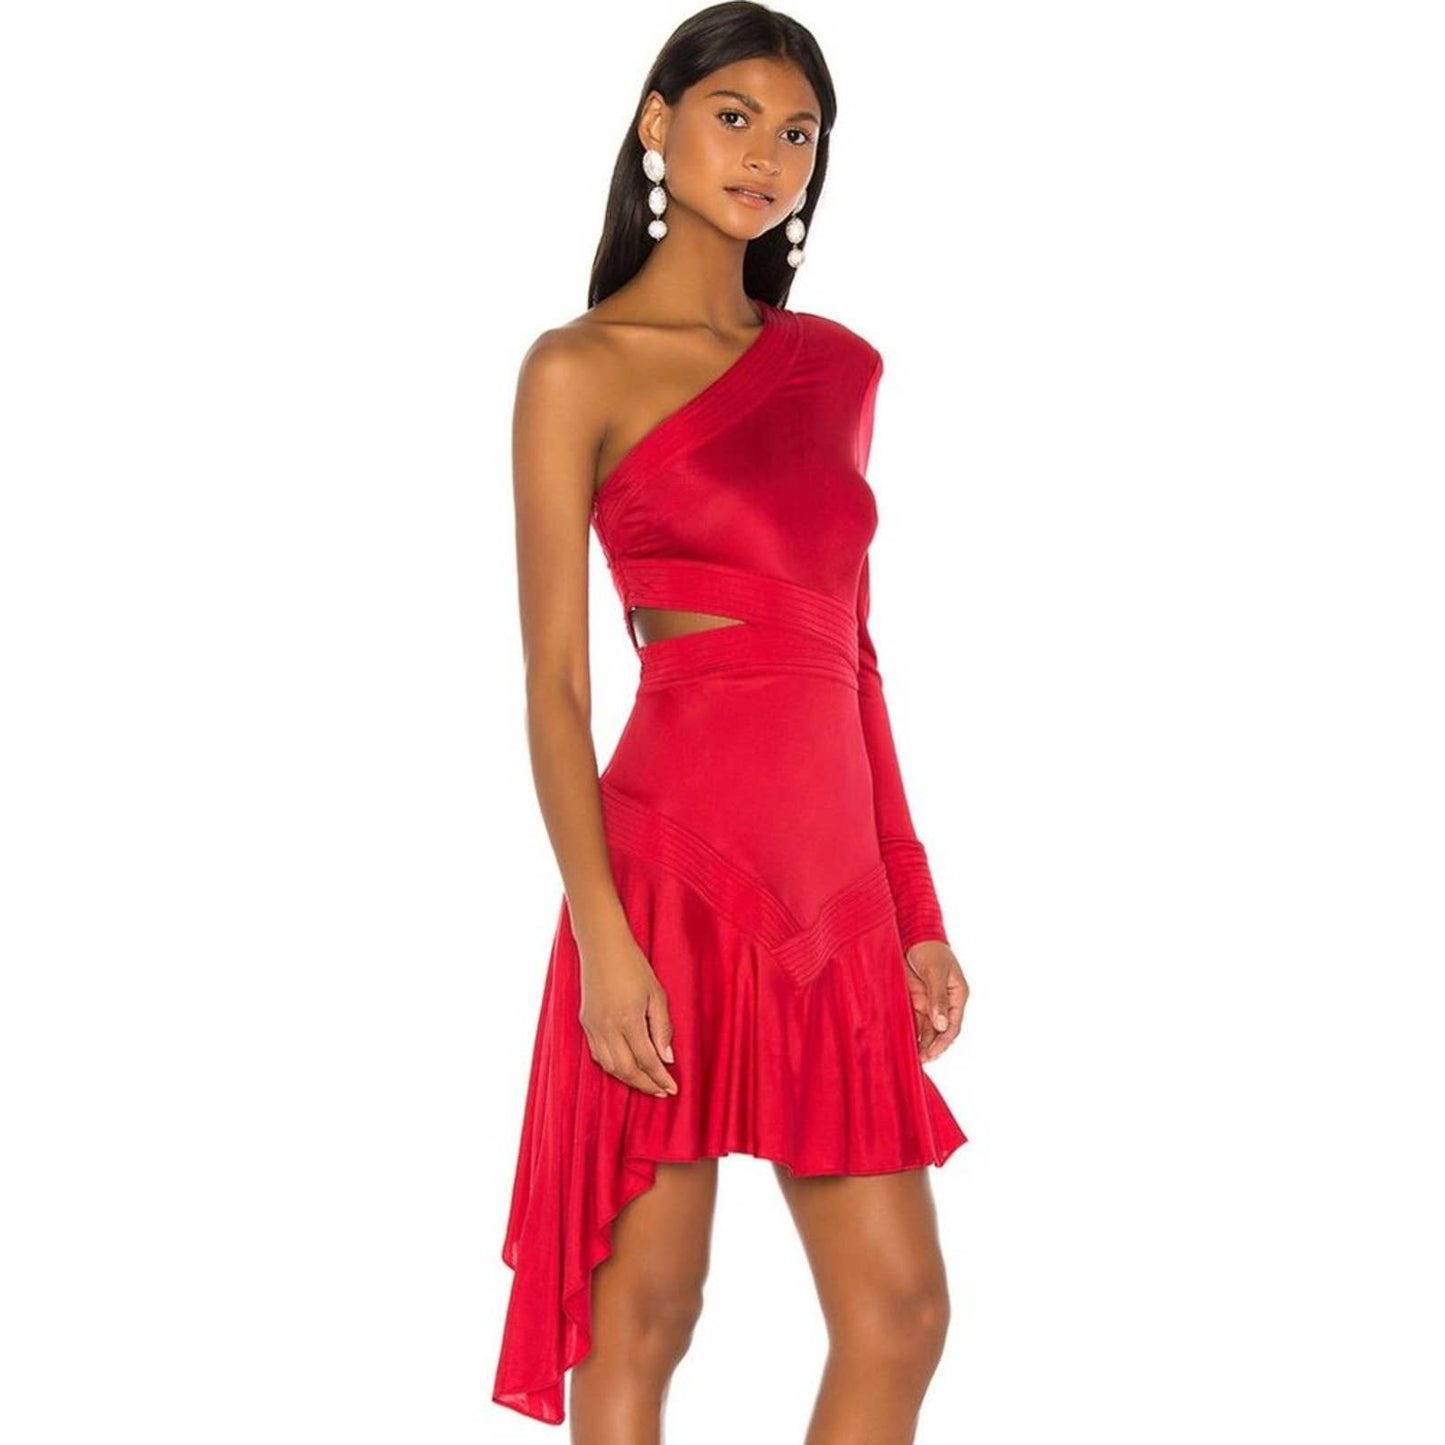 Alexis Rocca Dress in Cherry Red Size Small